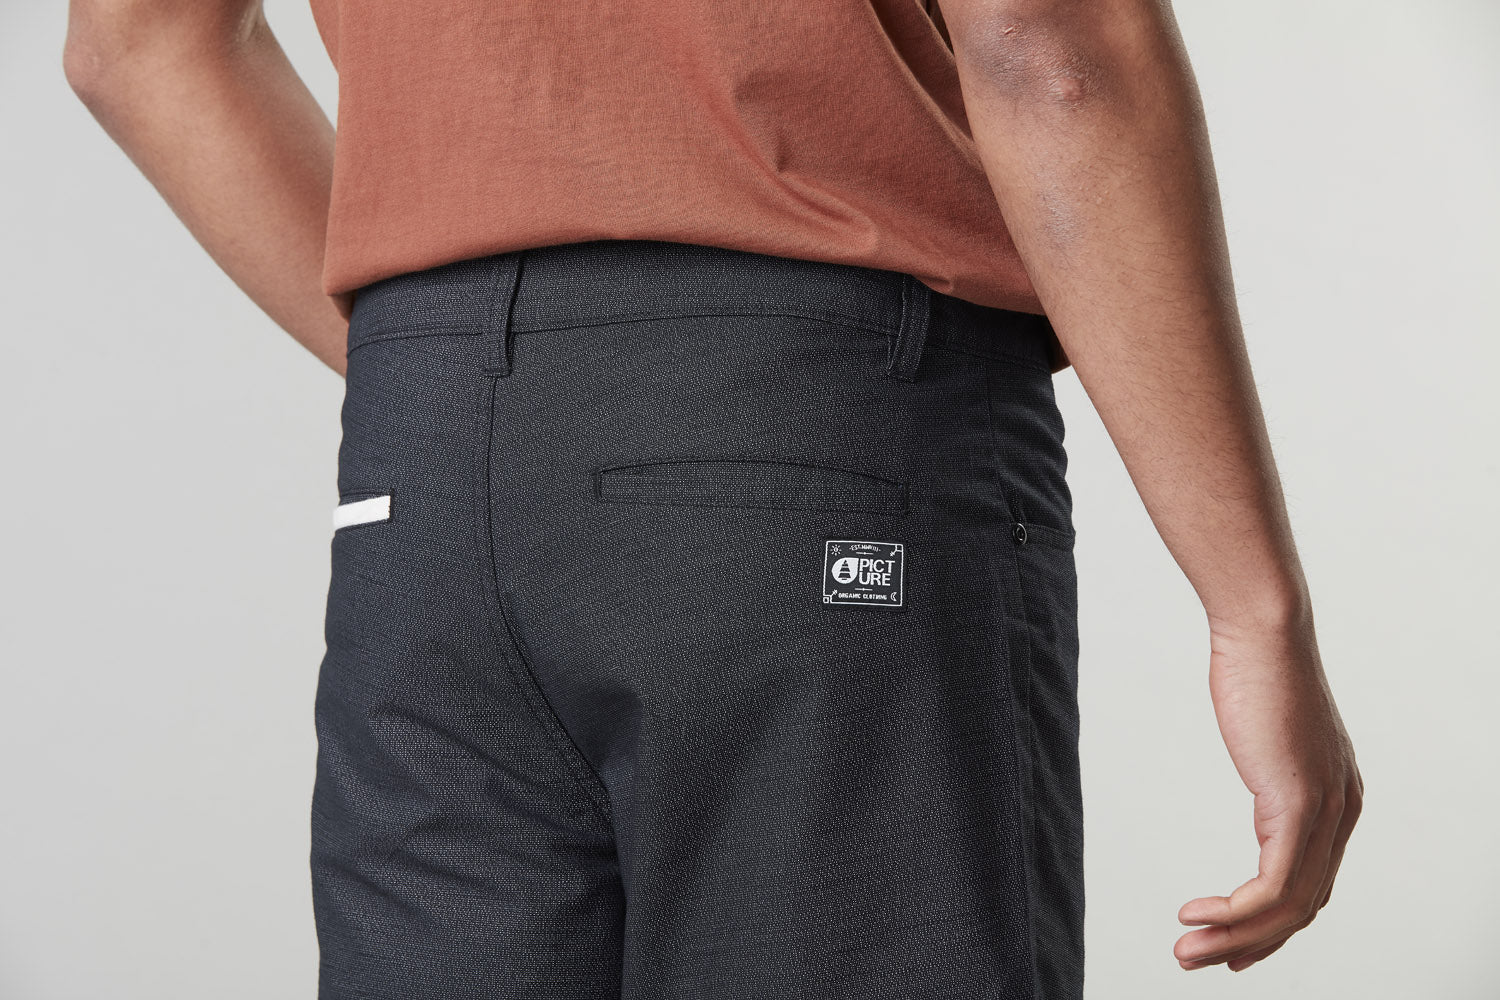 Picture Organic - M's Aldos Shorts - Recovery Cotton - Weekendbee - sustainable sportswear